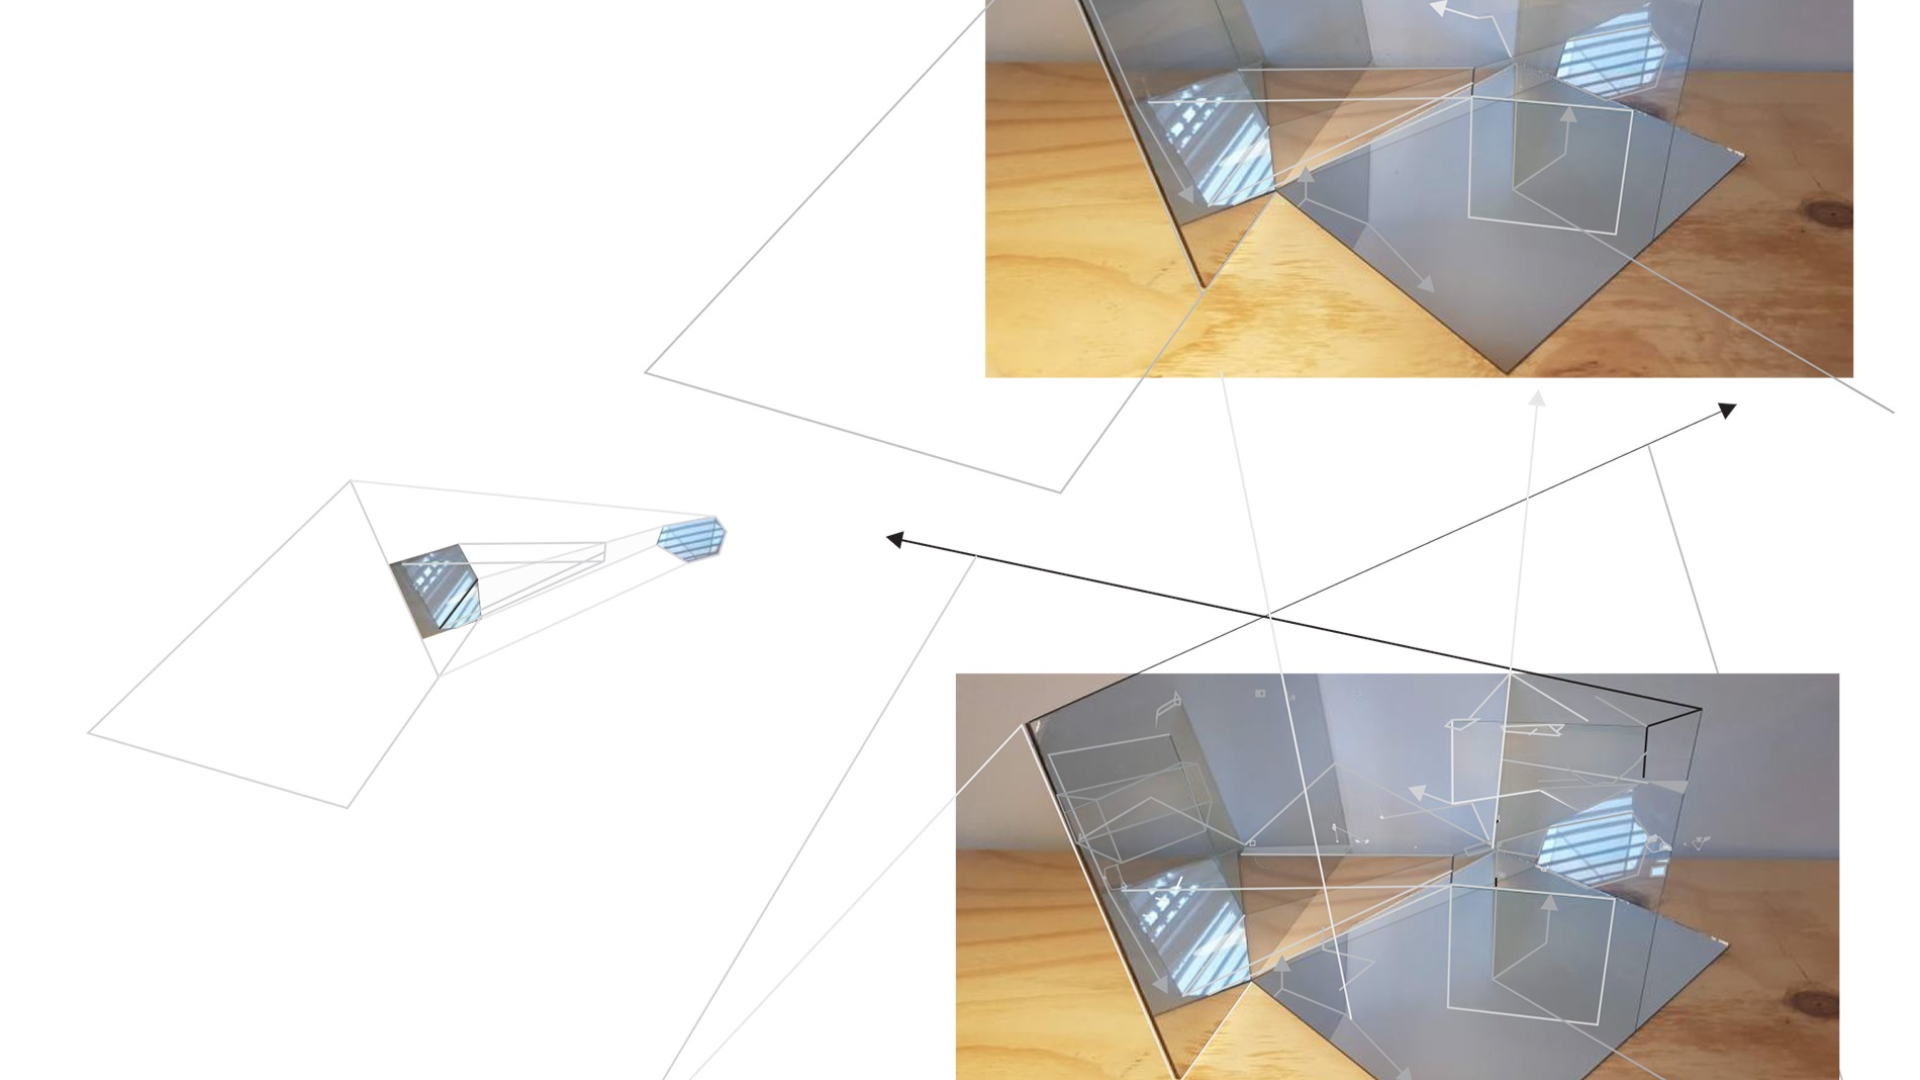 Mapping light interactions on reflective surfaces